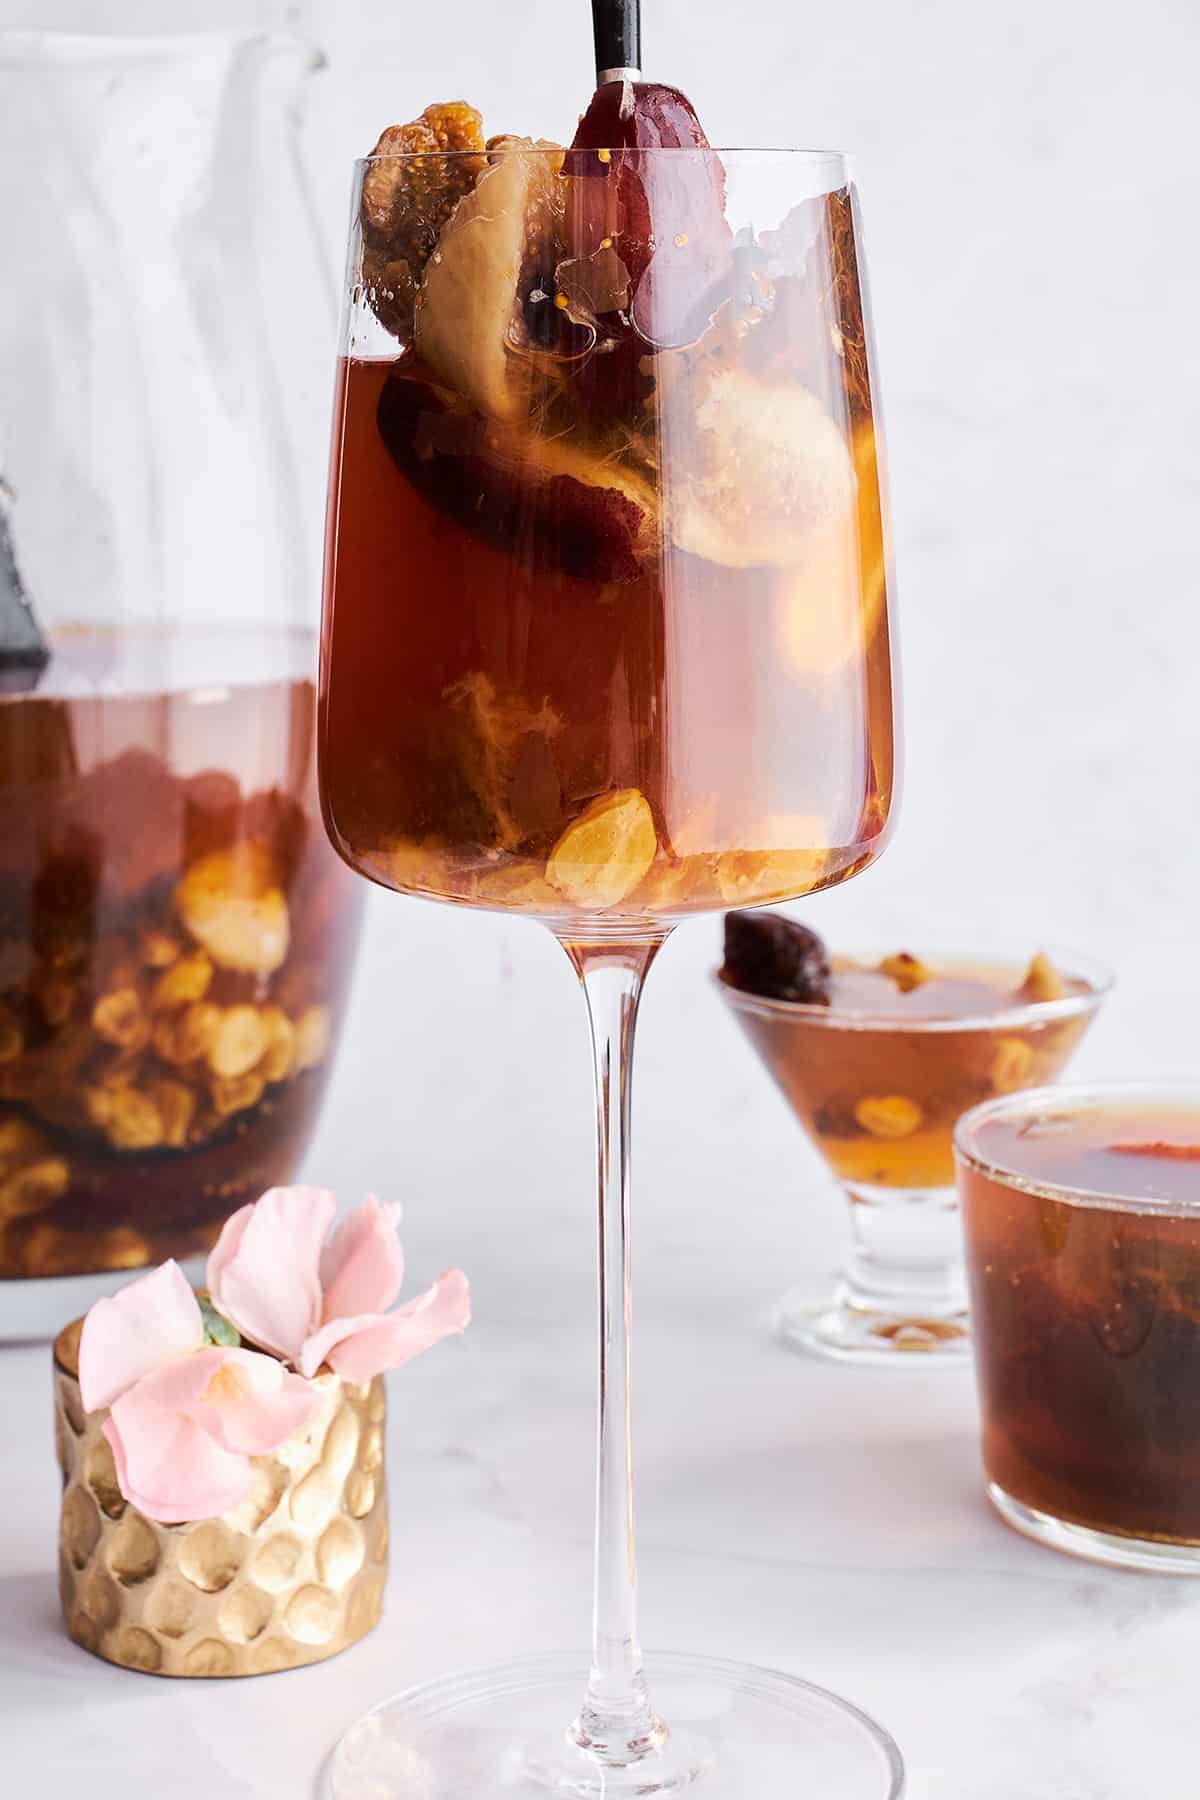 A glass of dried fruit compote drink.